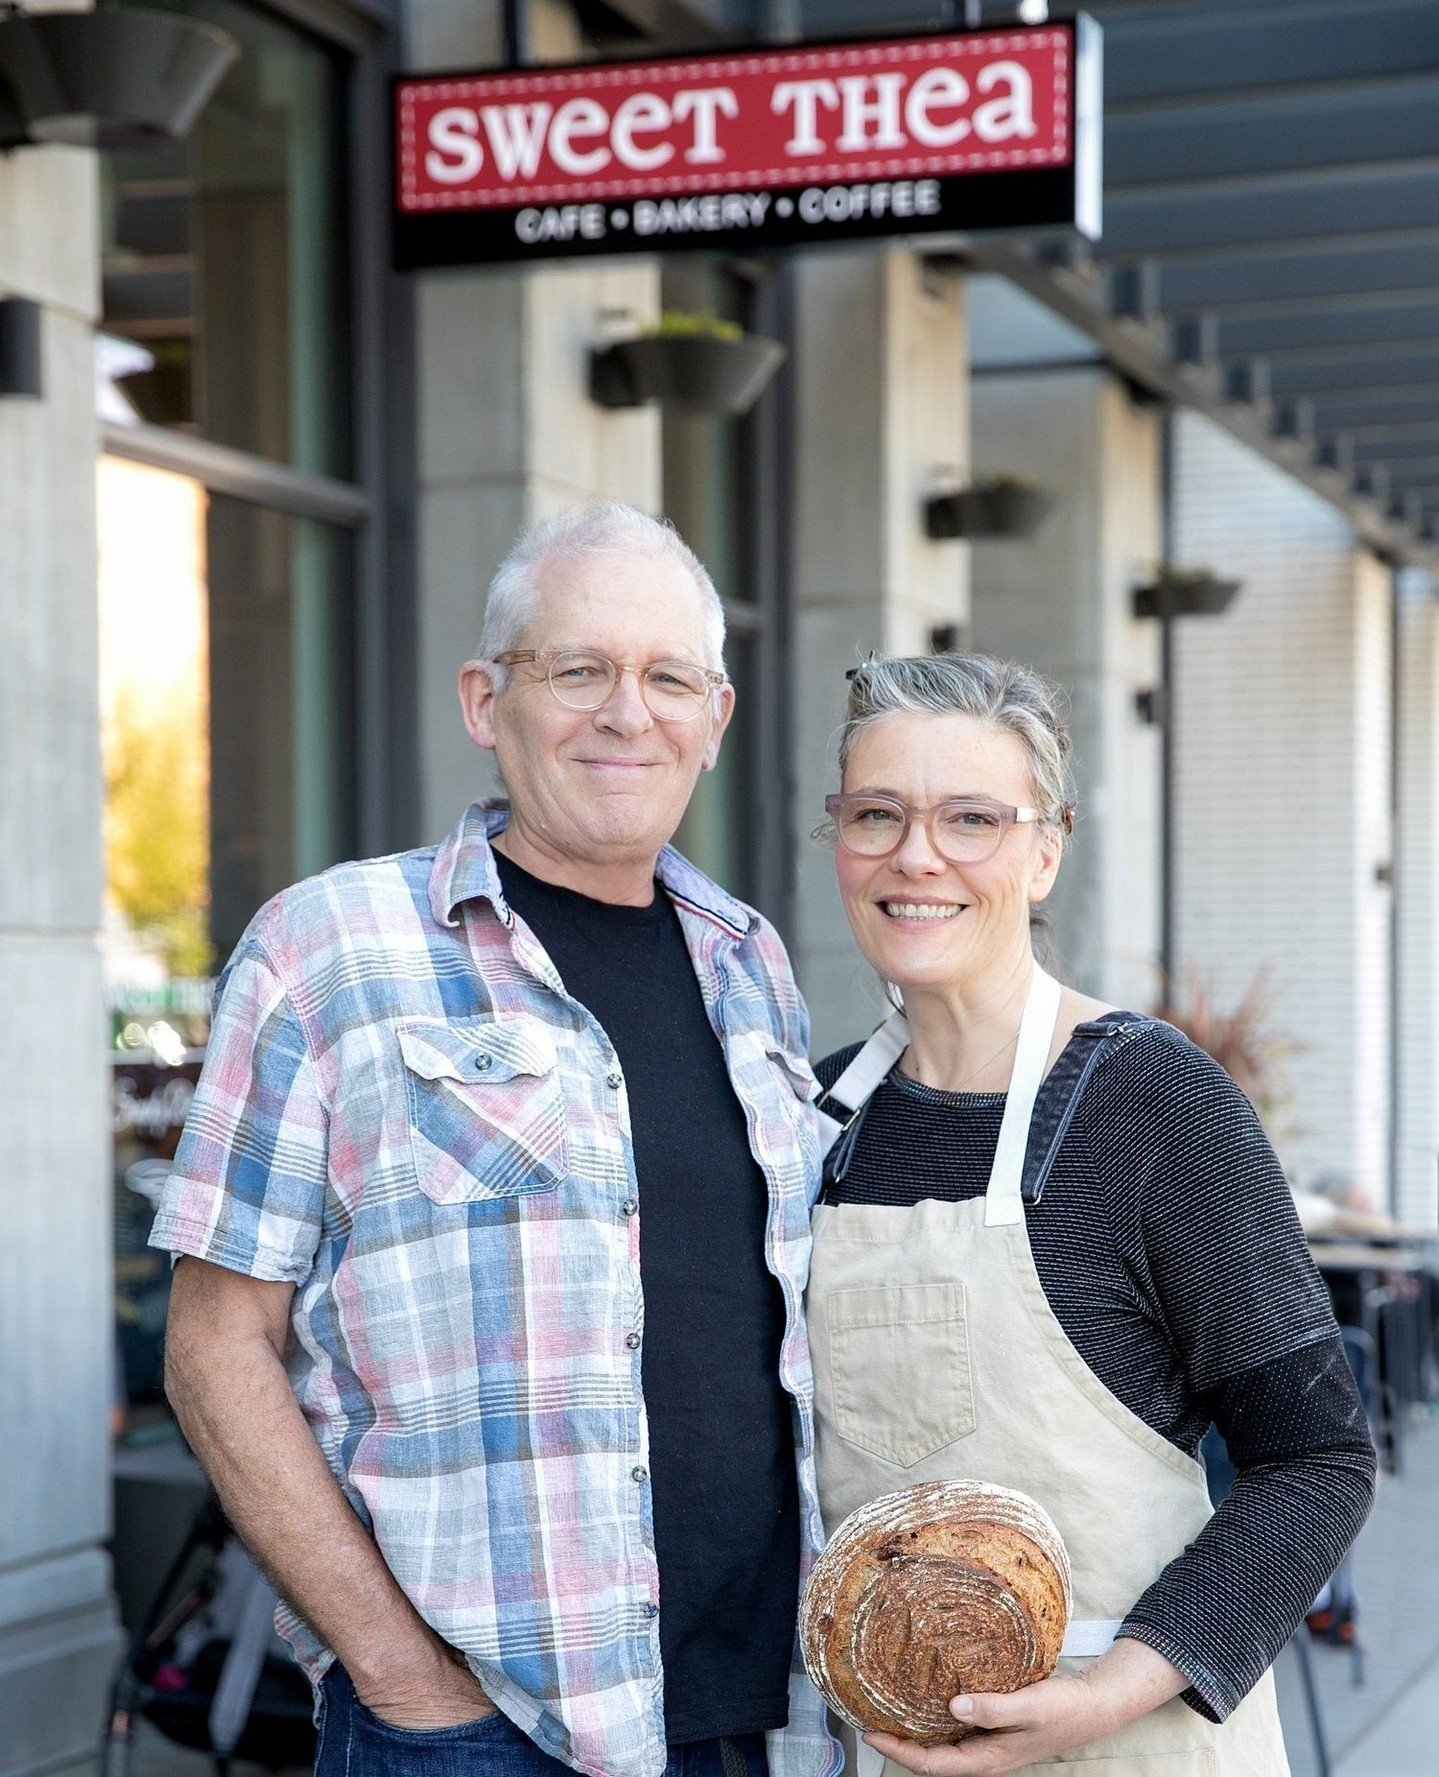 Music maven and pastry chef open @sweettheabakery spot in East Vancouver.⁠
⁠
New Main Street bake shop and caf&eacute; is a passion project of wife-and-husband team Thea and Laurie Mercer.⁠
⁠
Head to Stir to read more. ⁠
⁠
⁠
#yvrfood #yvrfoodie #east